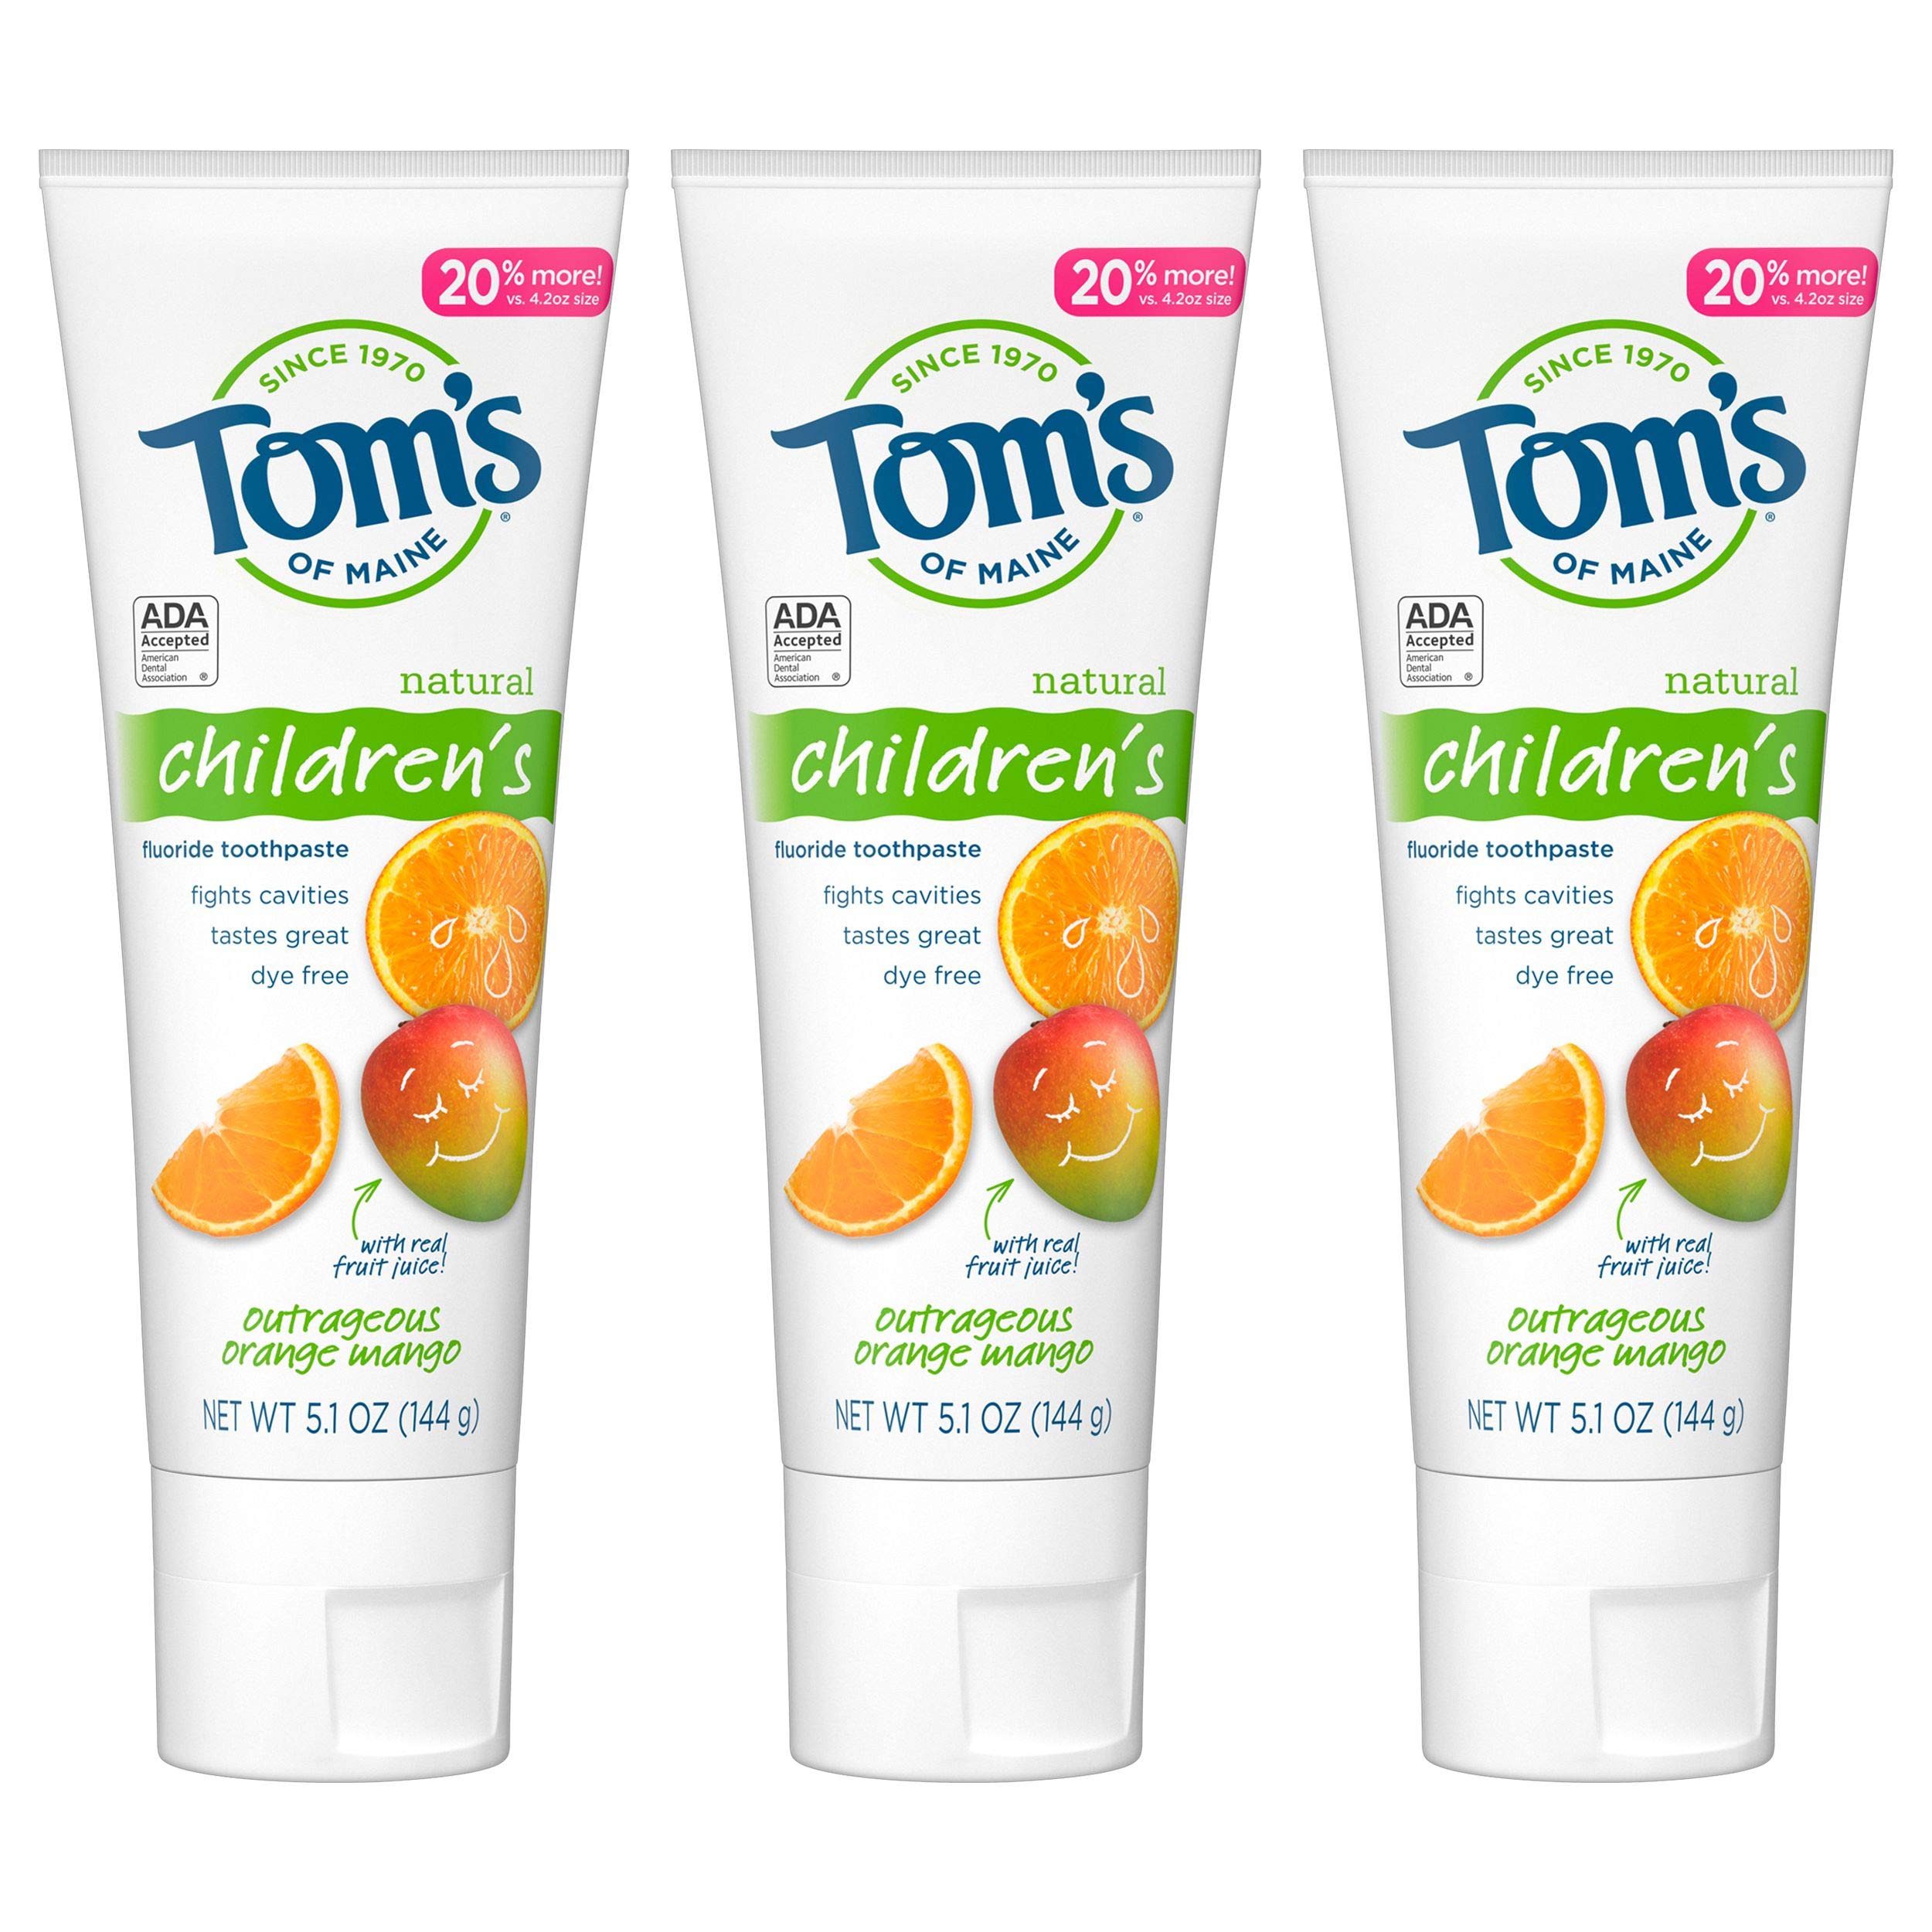 Tom's of Maine ADA Approved Fluoride Children's Toothpaste, Natural Toothpaste, Dye Free, No Artificial Preservatives, Outrageous Orange Mango, 5.1 oz. 3-Pack (Packaging May Vary)